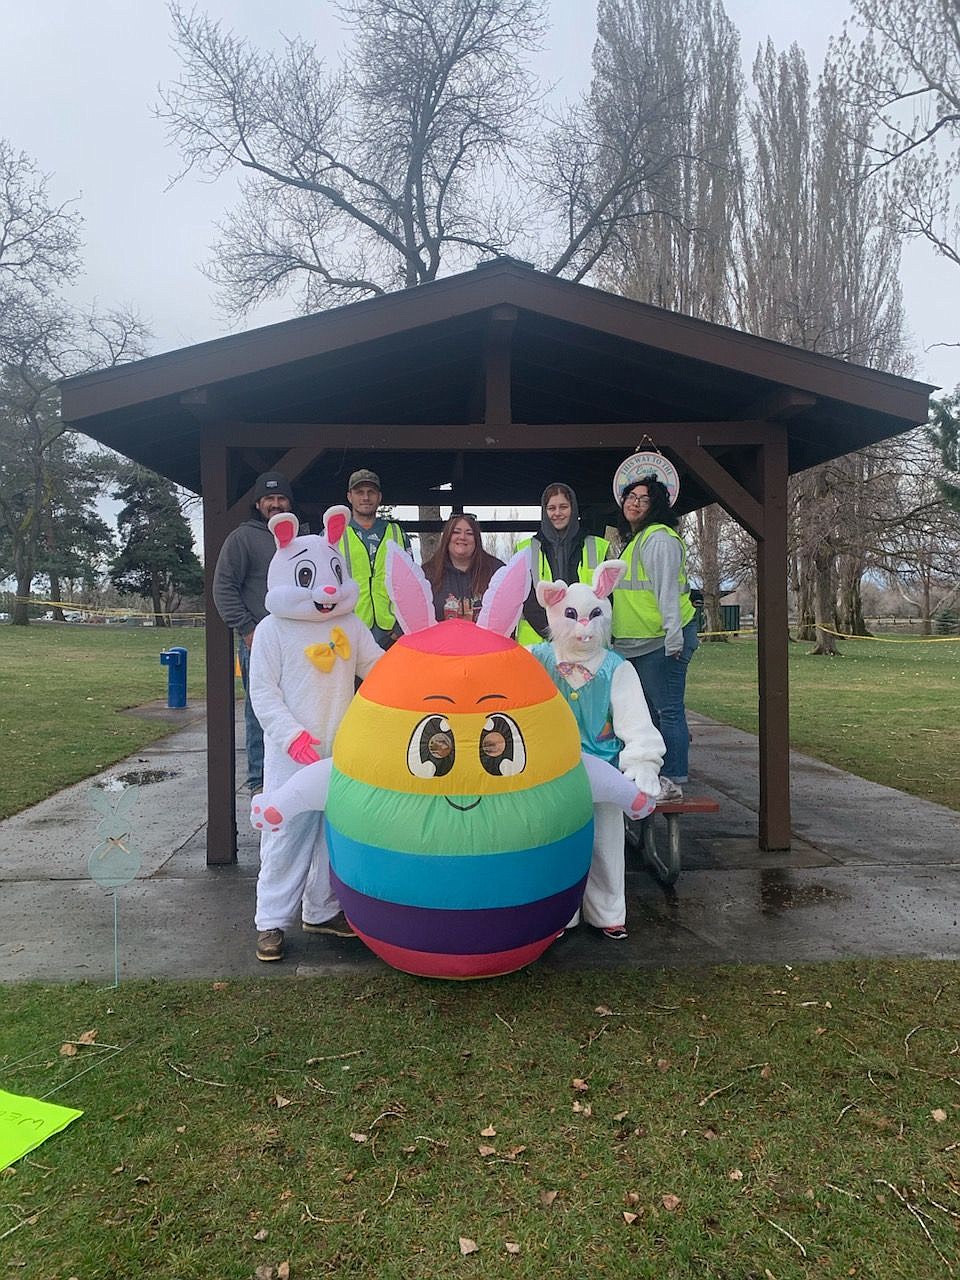 The Grant County Animal Outreach Easter egg hunt in Moses Lake's Blue Heron Park brought out all the characters over the weekend.